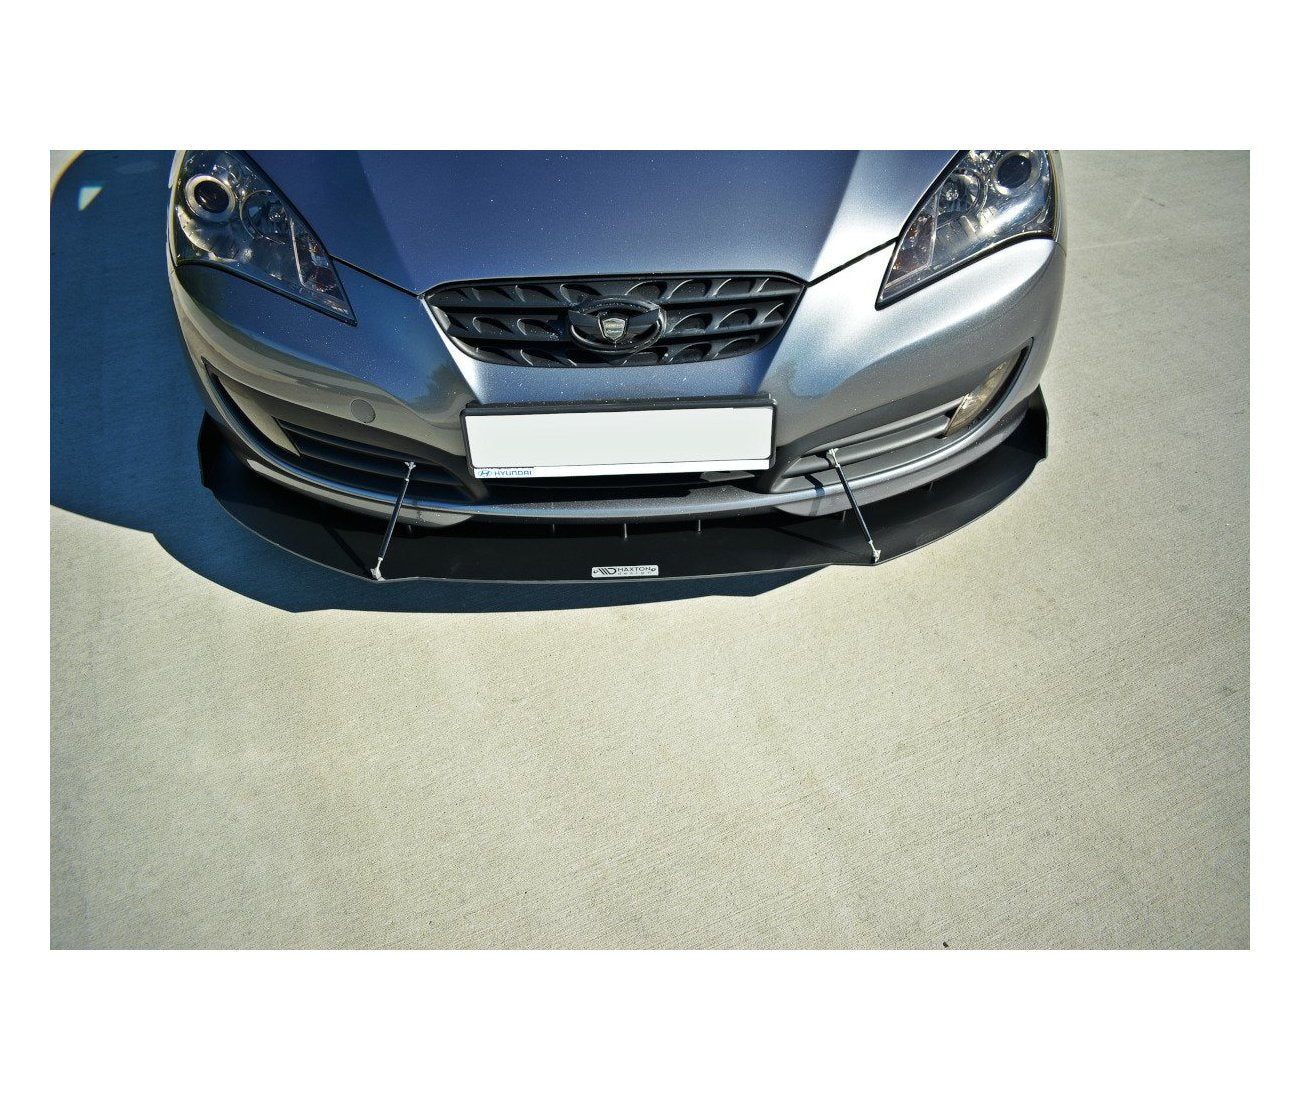 Racing Cup spoiler lip front approach for Hyundai Genesis Coupe